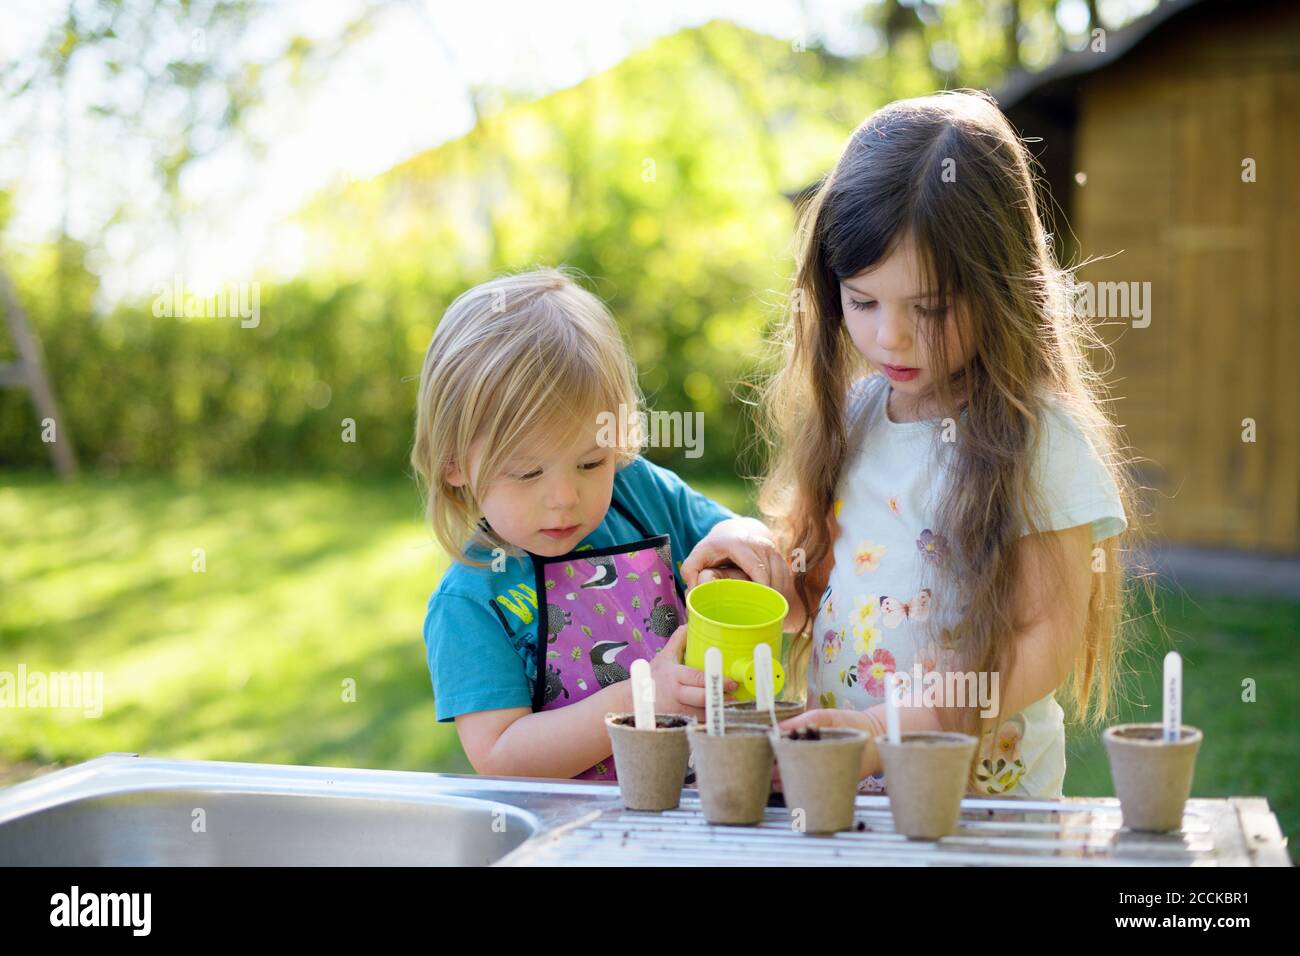 Cute girl watering plants while gardening with sister in at yard Stock Photo